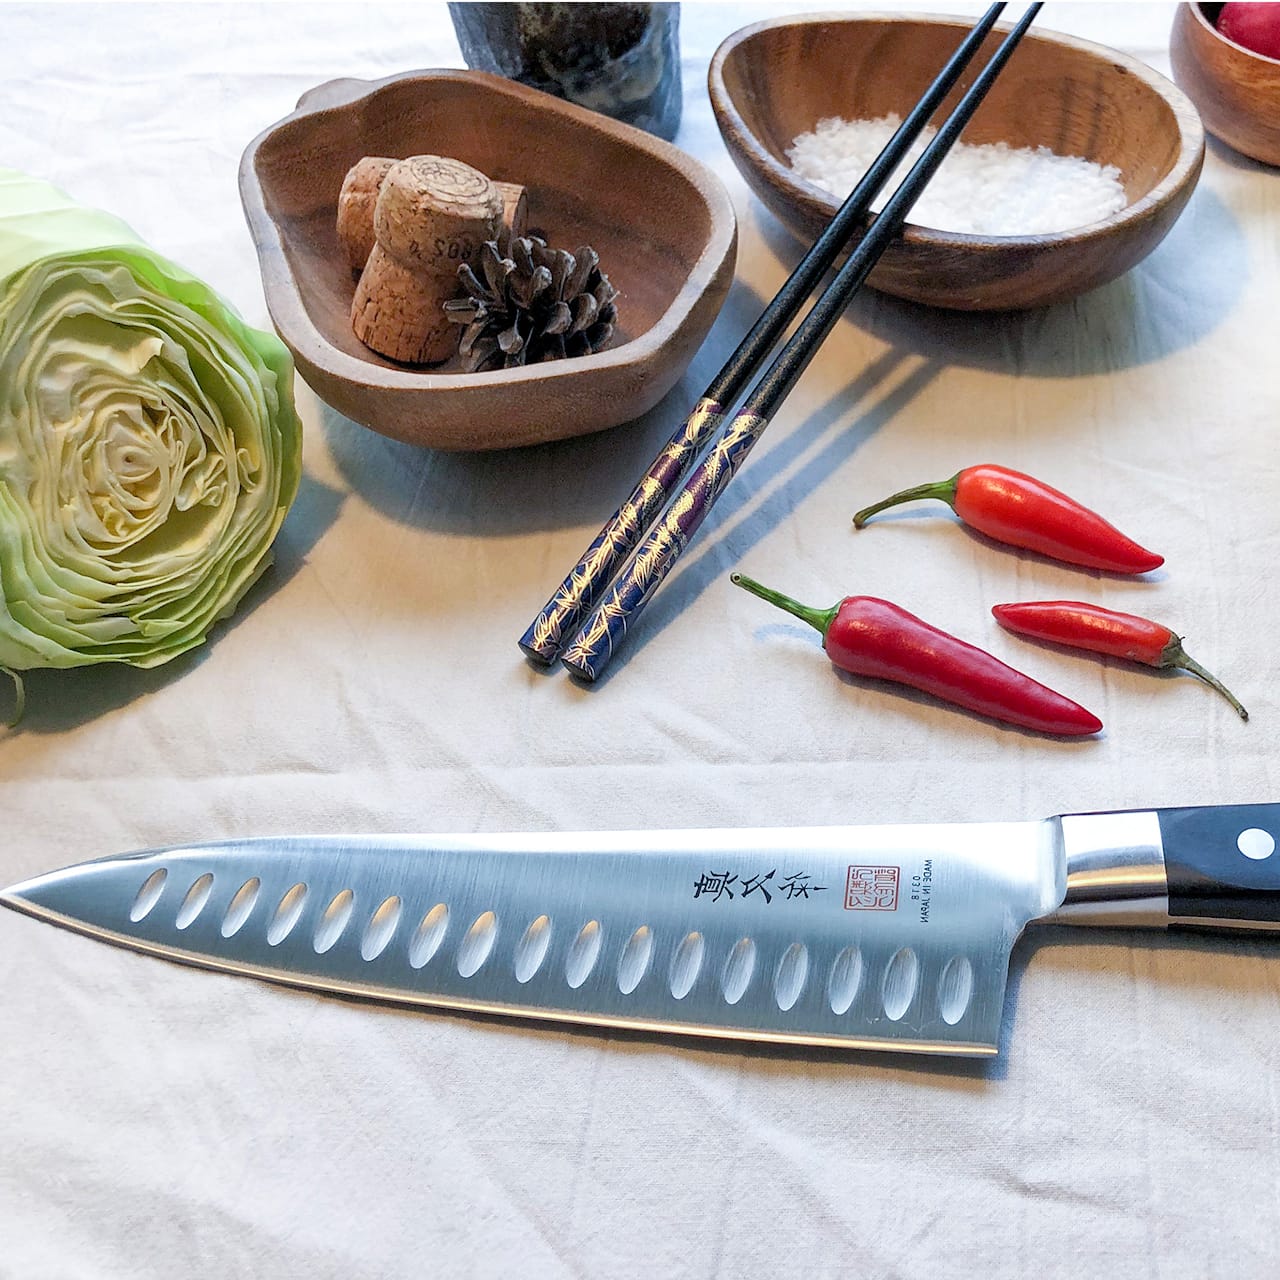 Mighty Chef's knife with olive sharpening 20 cm